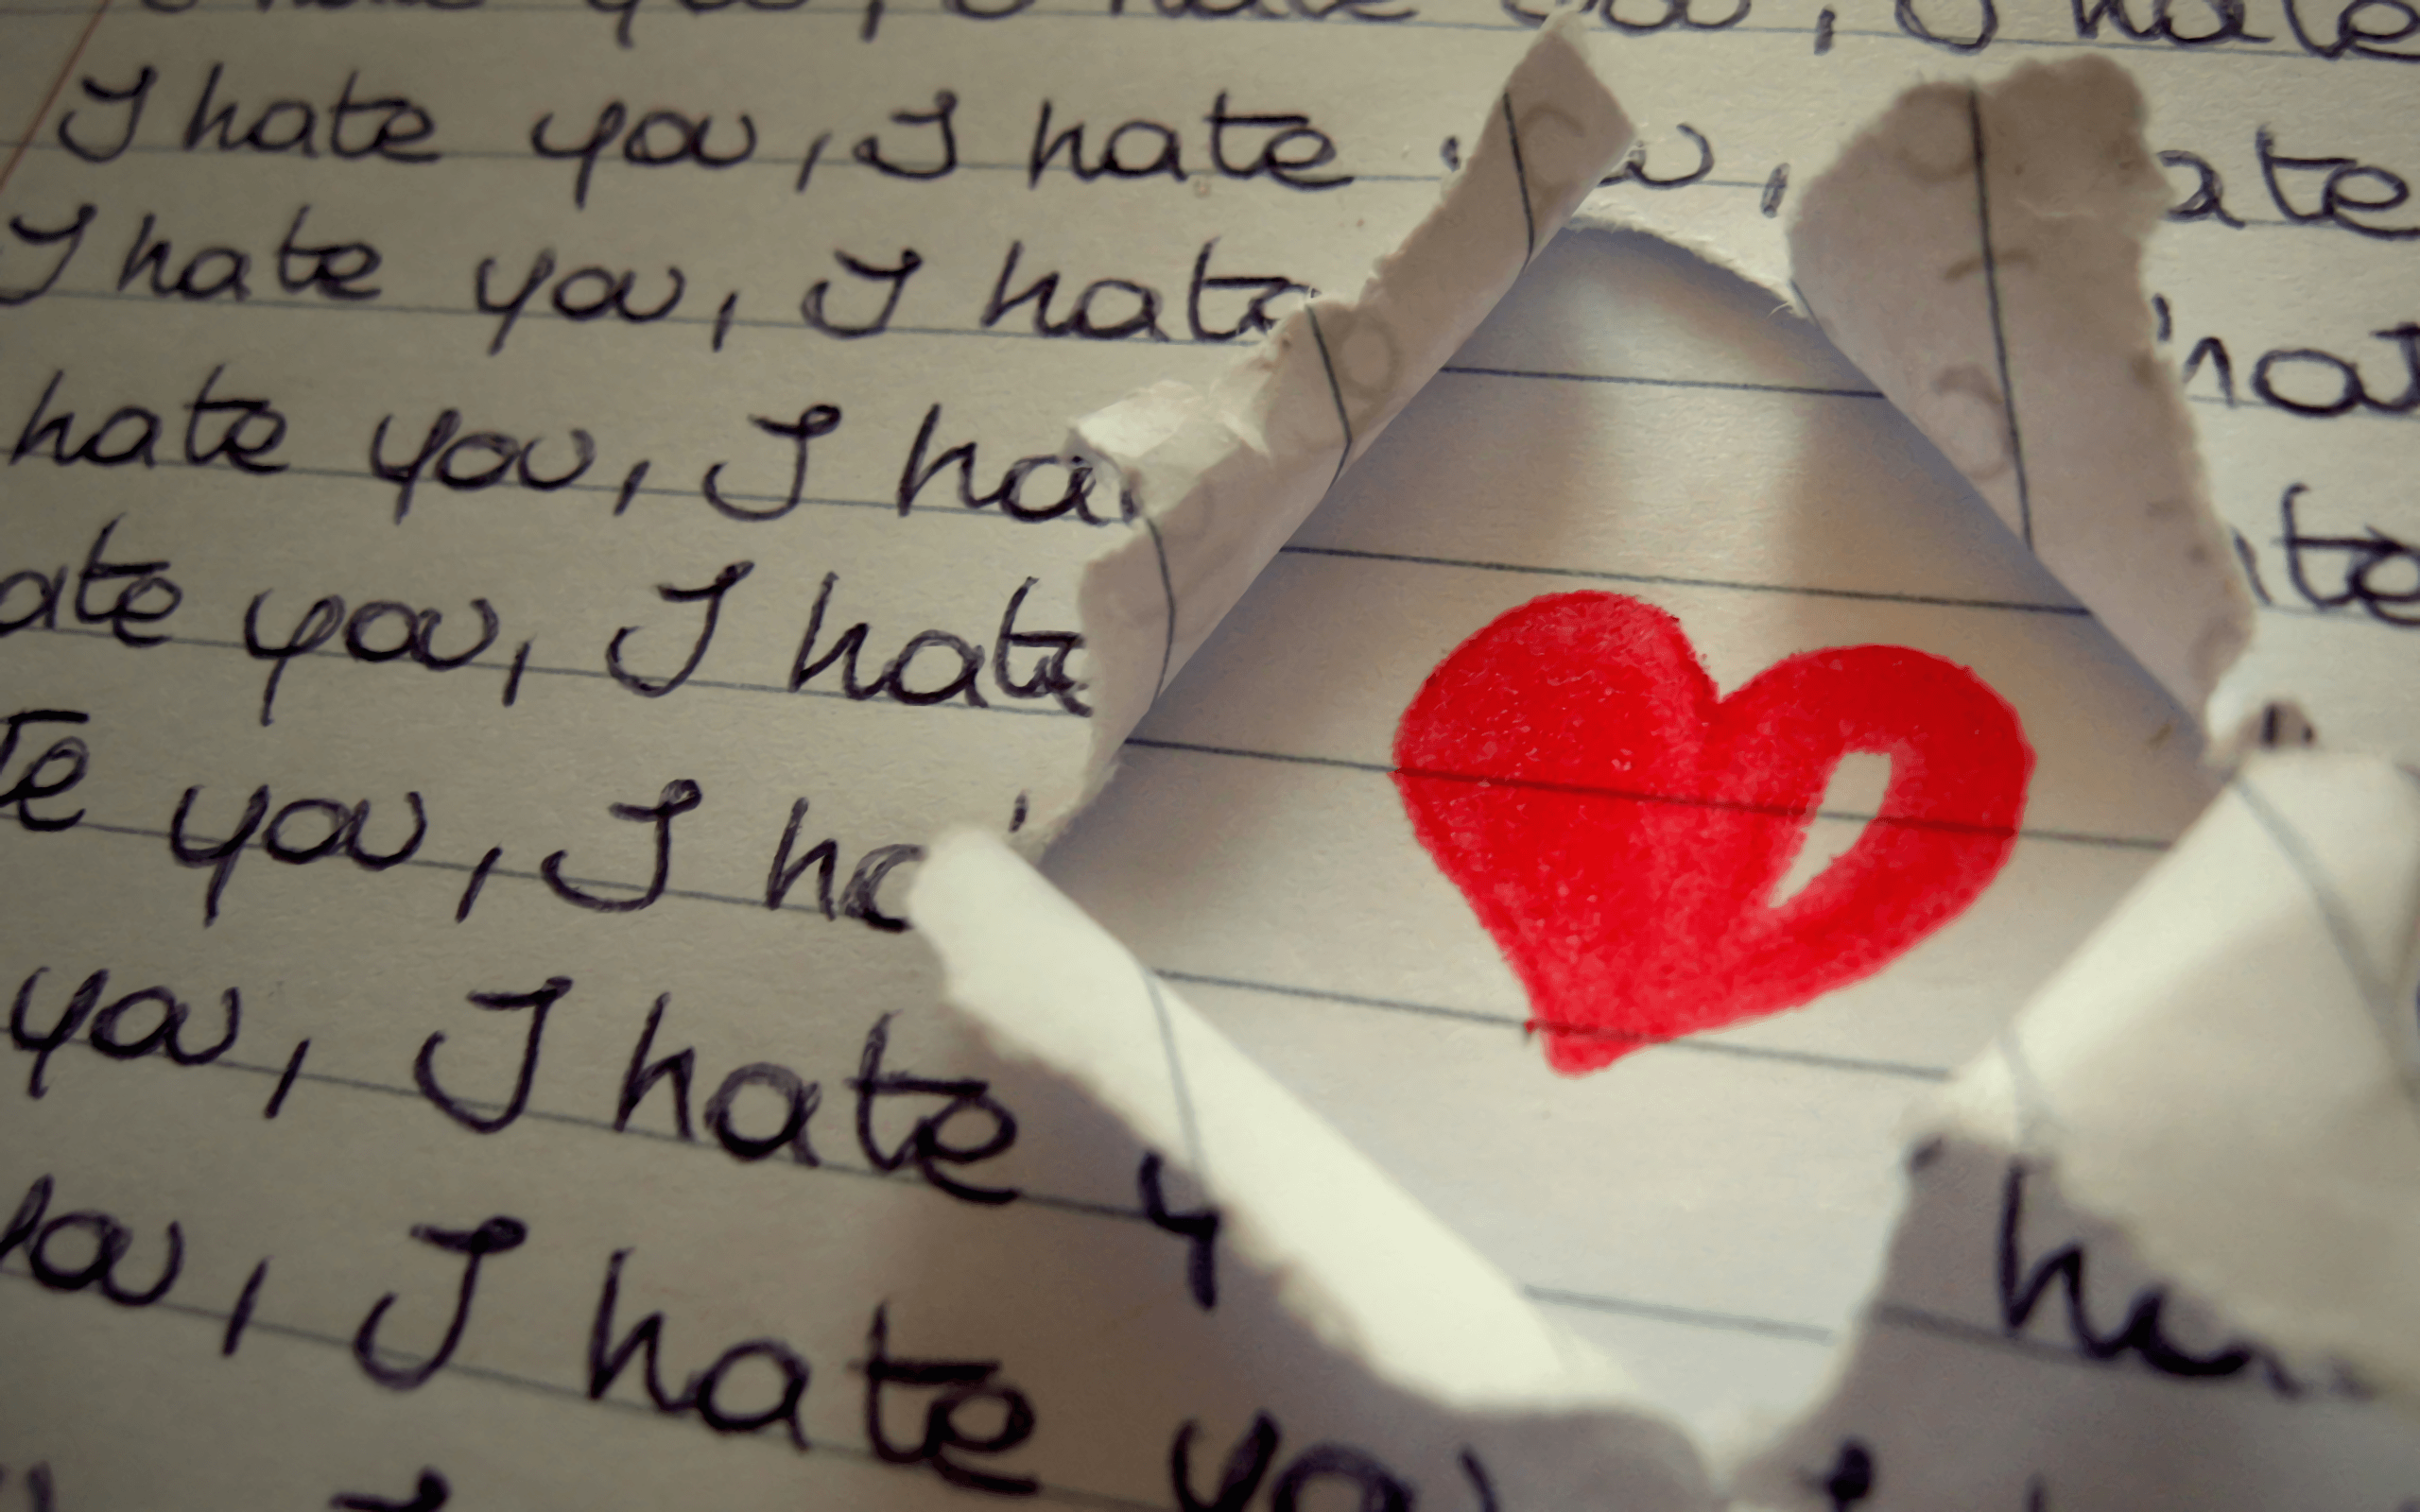 The heart under hate HD Wallpaper. Background Imagex1600